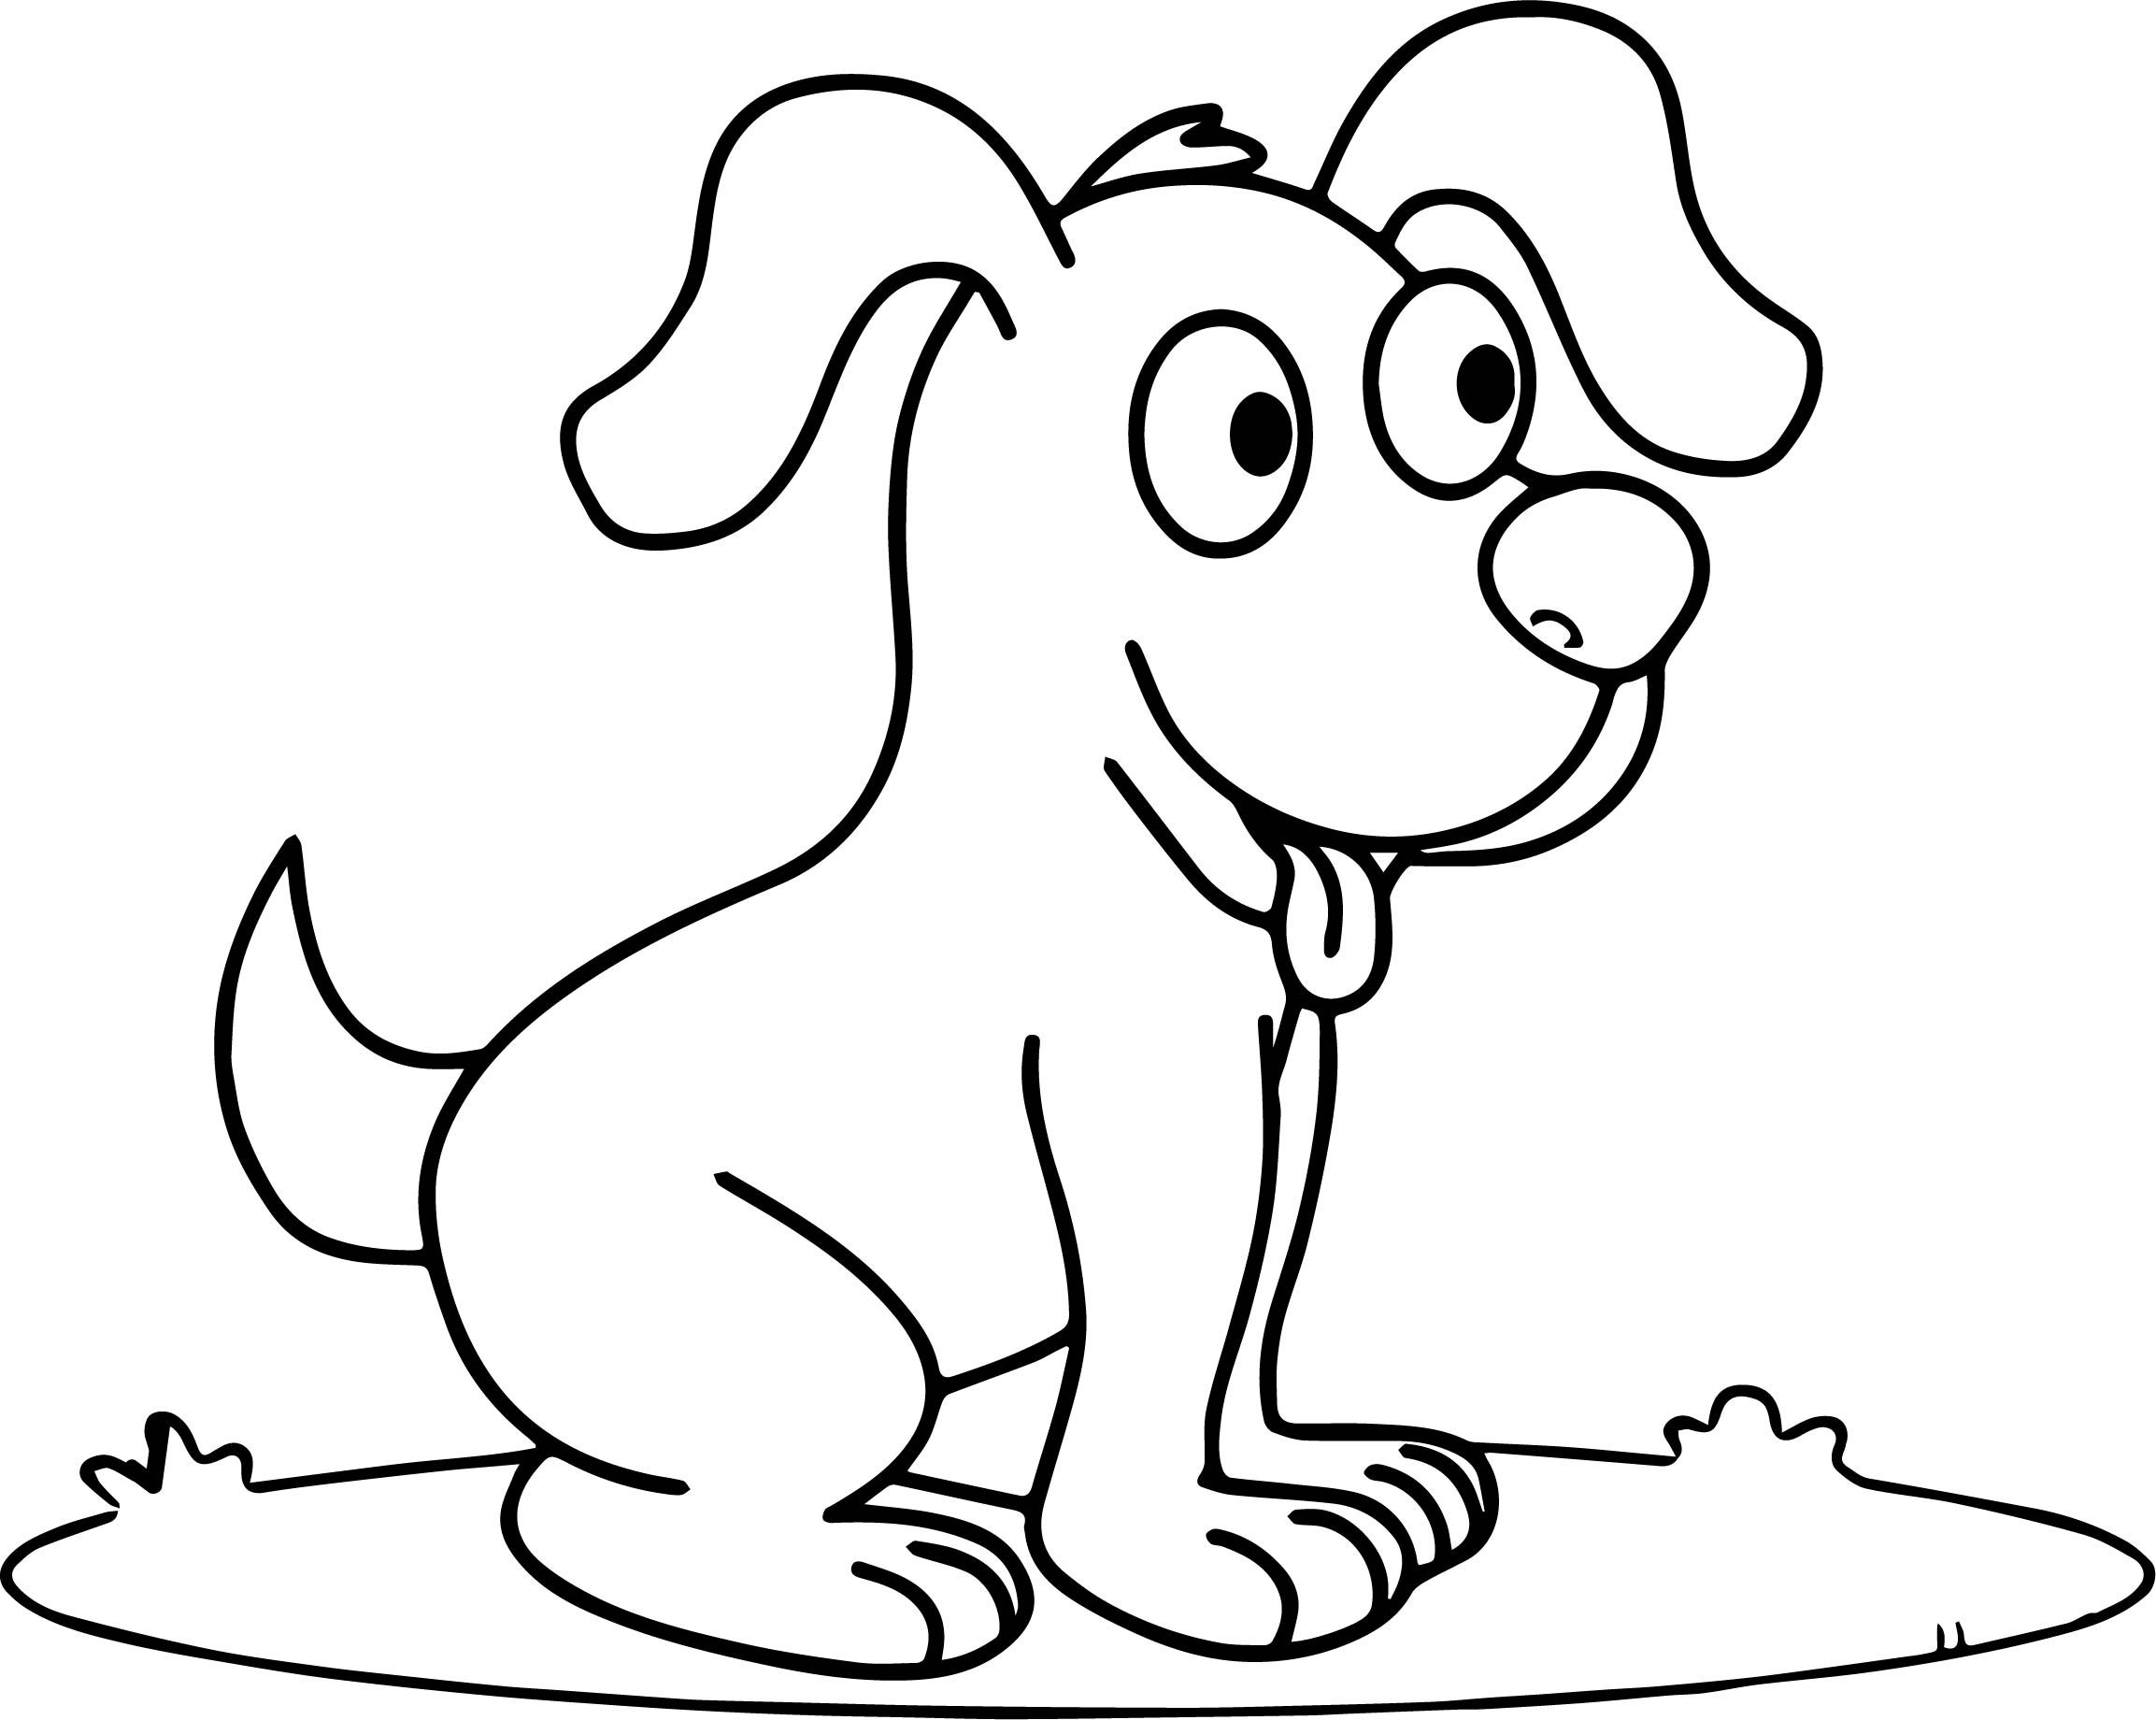 Wiener Dog Coloring Pages at GetColorings.com | Free ...